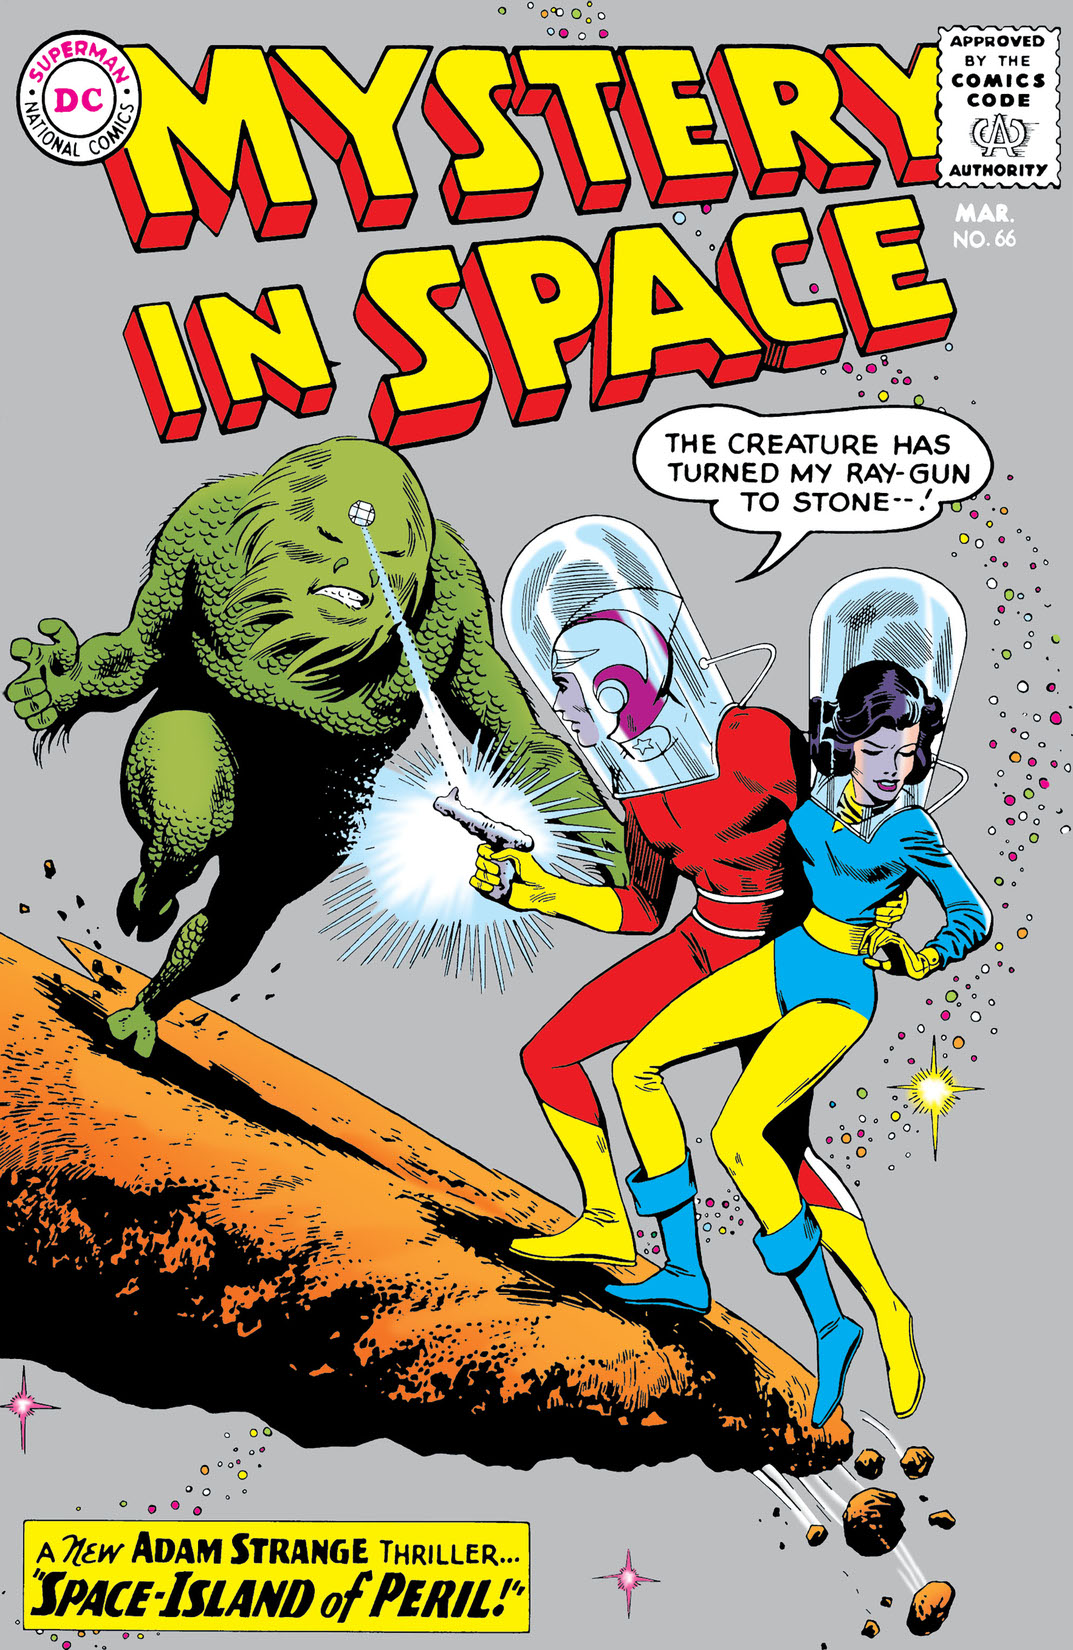 Mystery in Space (1951-) #66 preview images